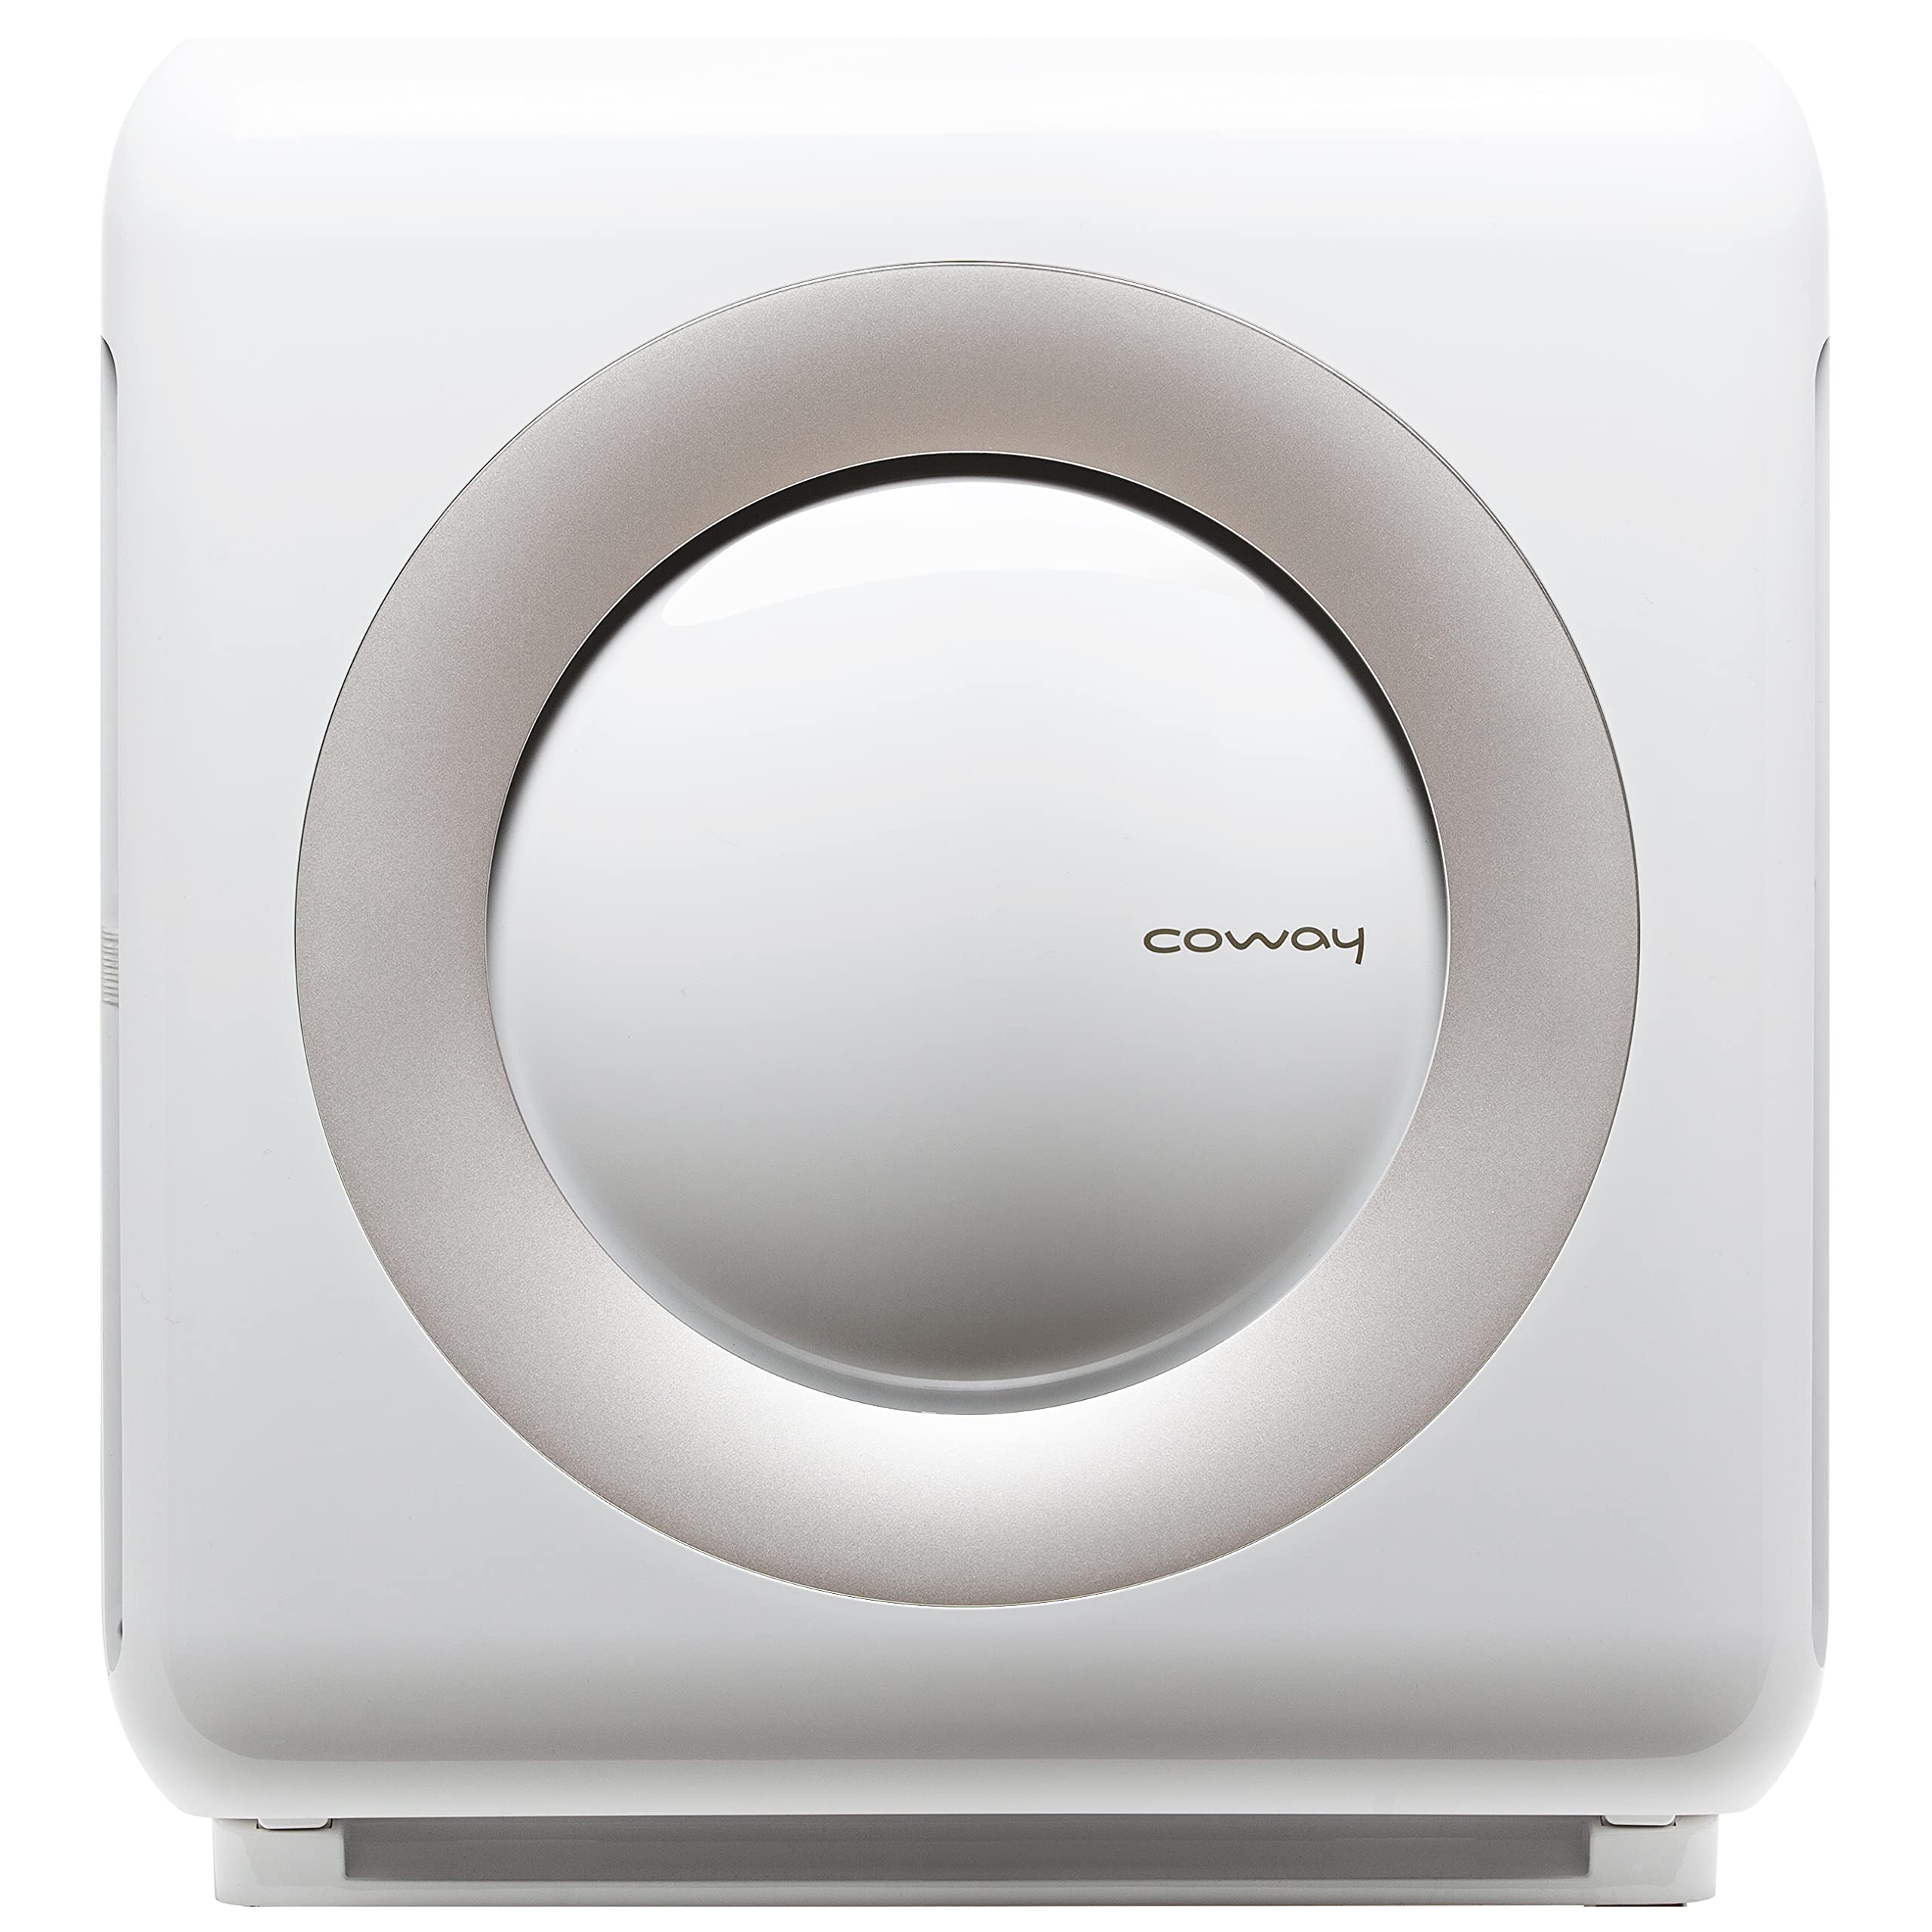 Coway Airmega AP-1512HH(W) True HEPA Purifier with Air Quality Monitoring, Auto, Timer, Filter Indicator, and Eco Mode, 16.8 x 18.3 x 9.7, White (7763037454574)